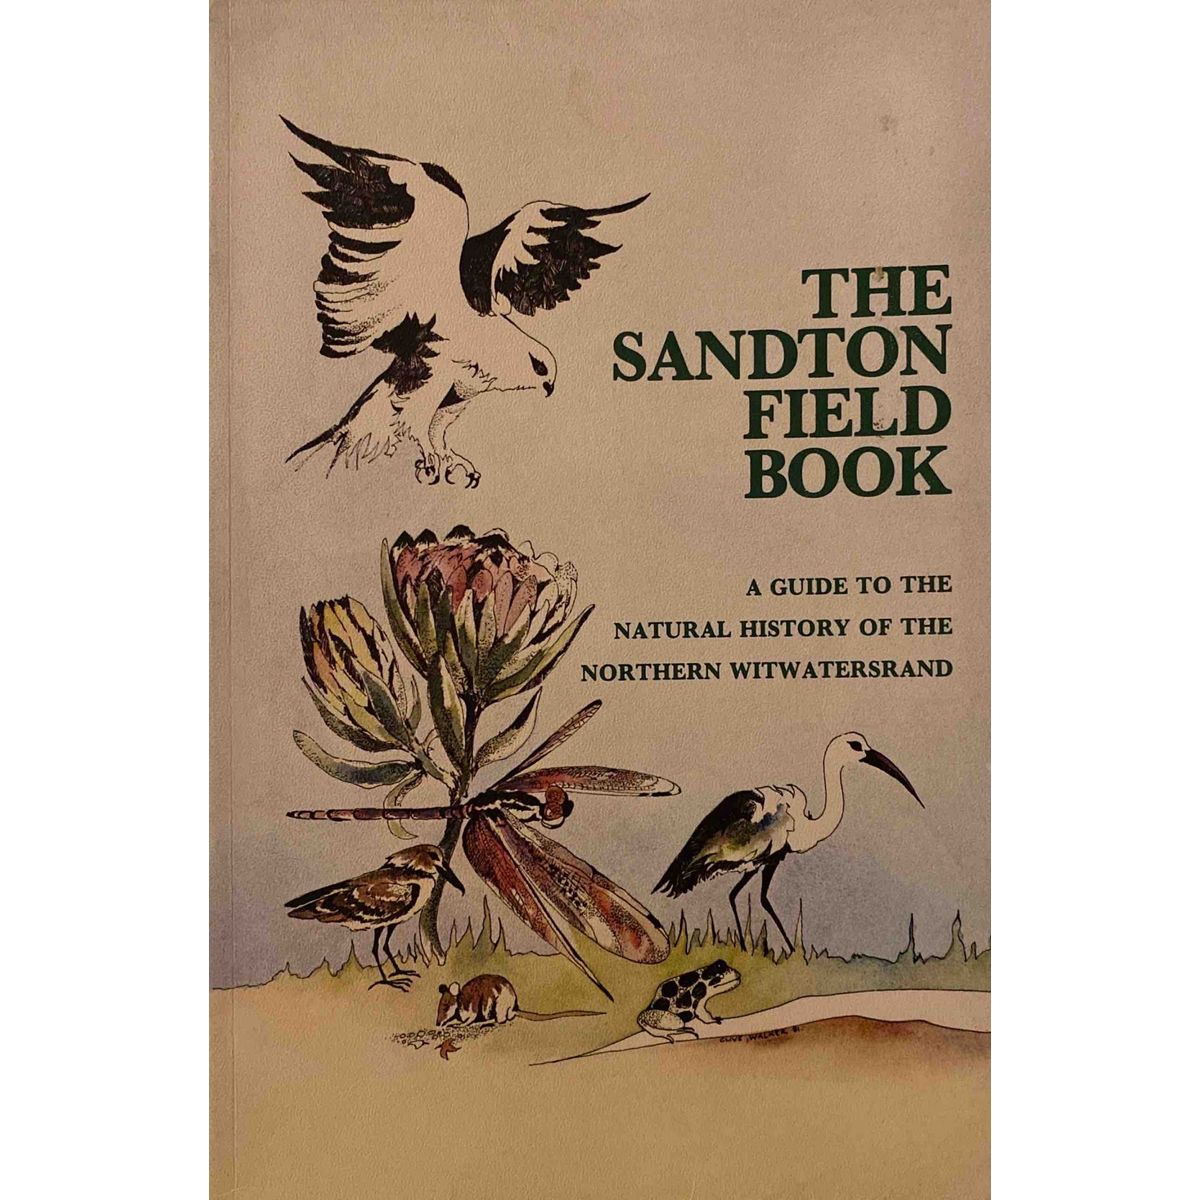 ISBN: 9780620059022 / 0620059028 - The Sandton Field Book: A Guide to the Natural History of the Northern Witwatersrand by Vincent Curruthers [1993]